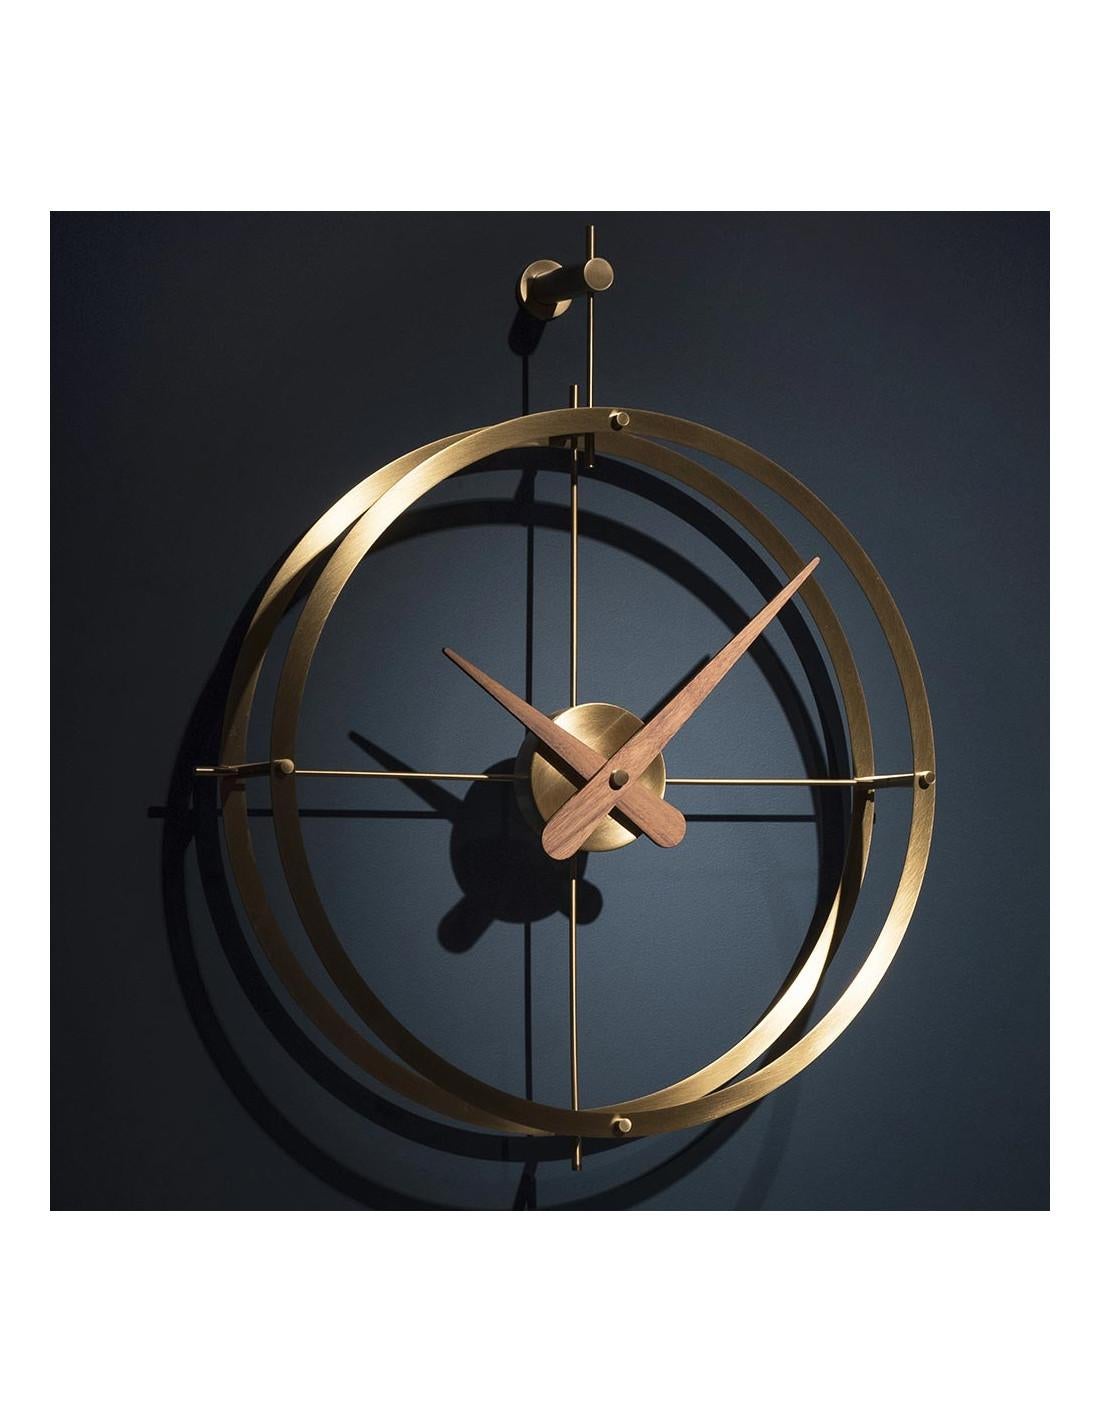 2 puntos Premium wall clock It is the classic industrial style wall clock. It has the machinery case and rods made of polished brass, and the hands and rings in walnut wood.
2 puntos Premium wall clock : Rings and central box in polished brass ,